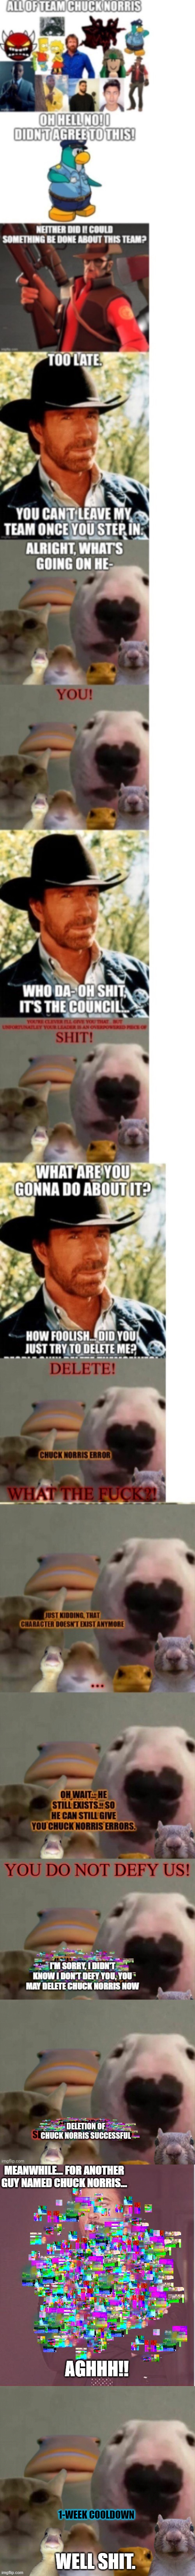 Oops, looks like you killed another innocent man named Chuck Norris, the less popular one | MEANWHILE... FOR ANOTHER GUY NAMED CHUCK NORRIS... AGHHH!! 1-WEEK COOLDOWN; WELL SHIT. | image tagged in memes,face you make robert downey jr,the council remastered | made w/ Imgflip meme maker